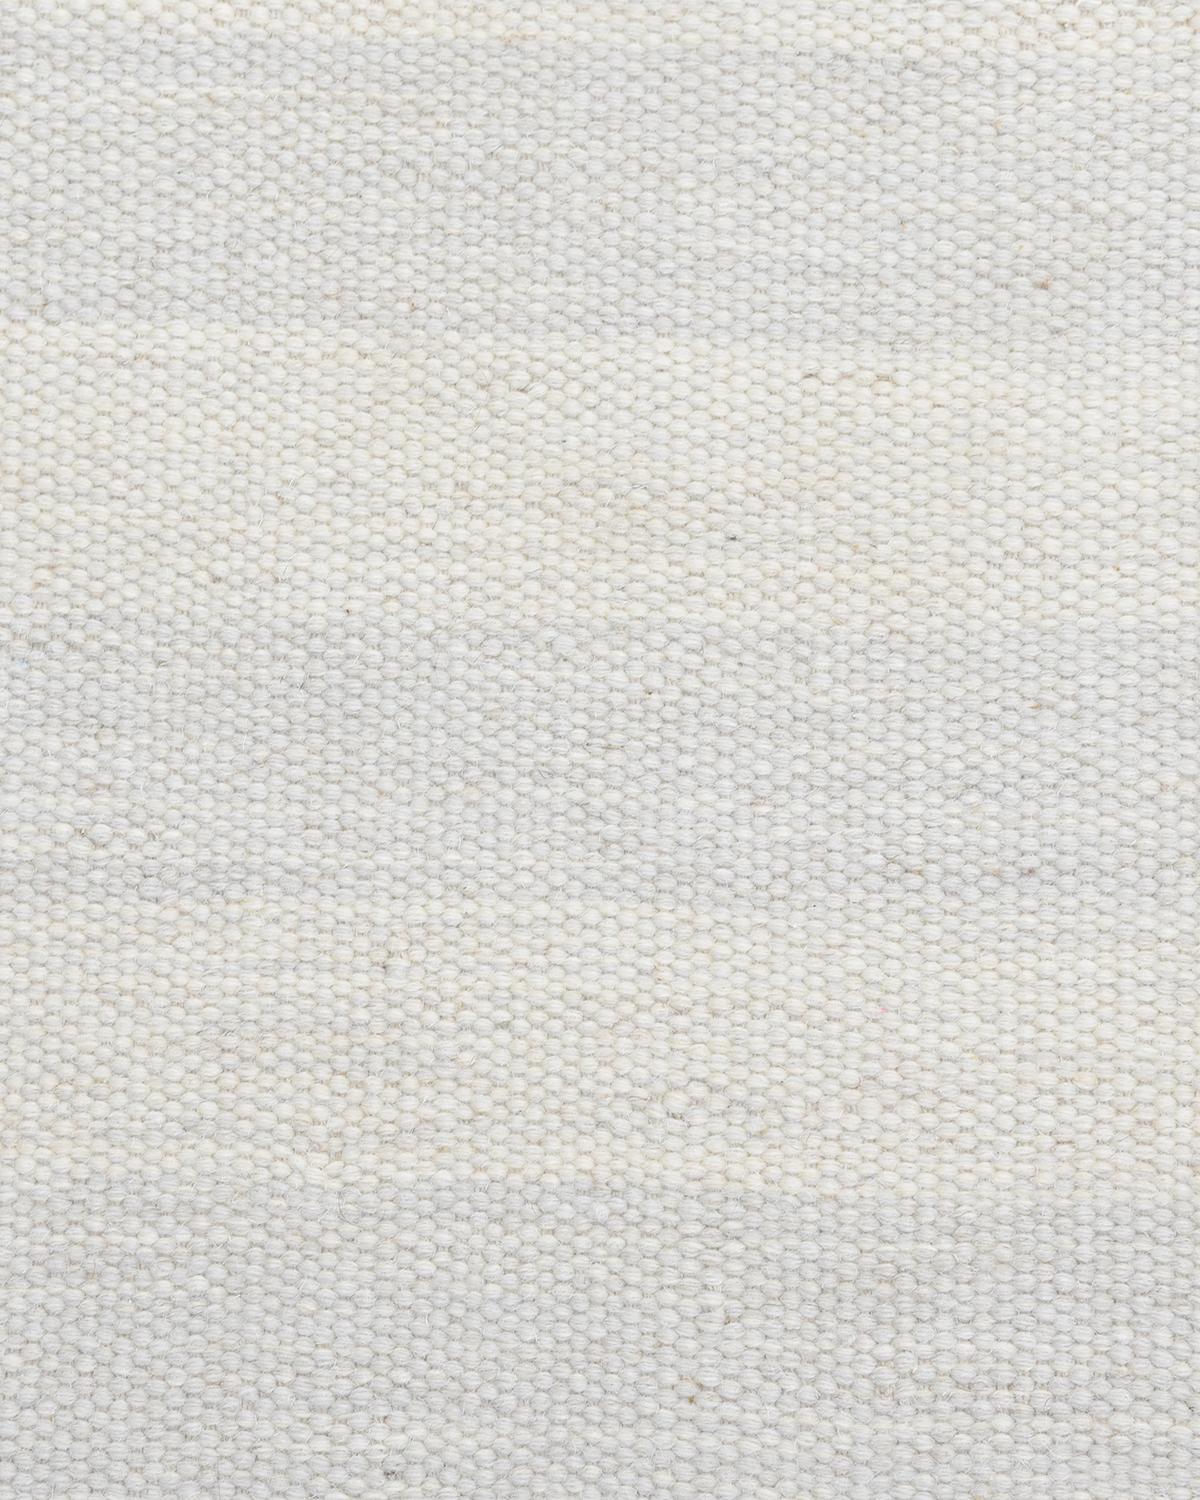 Indian Solo Rugs Flatweave Striped Hand Woven Ivory Area Rug For Sale